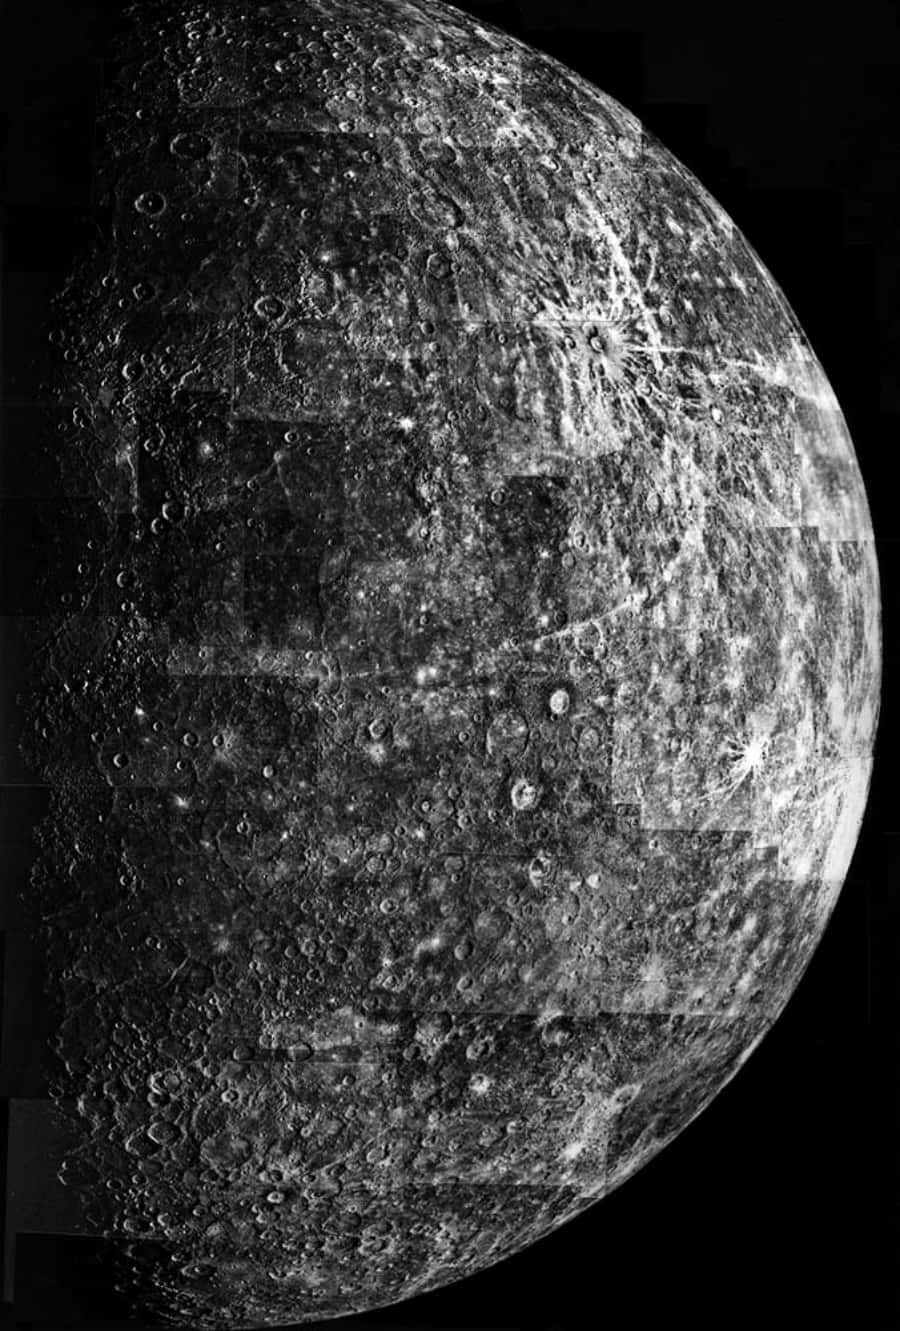 A Black And White Image Of The Moon